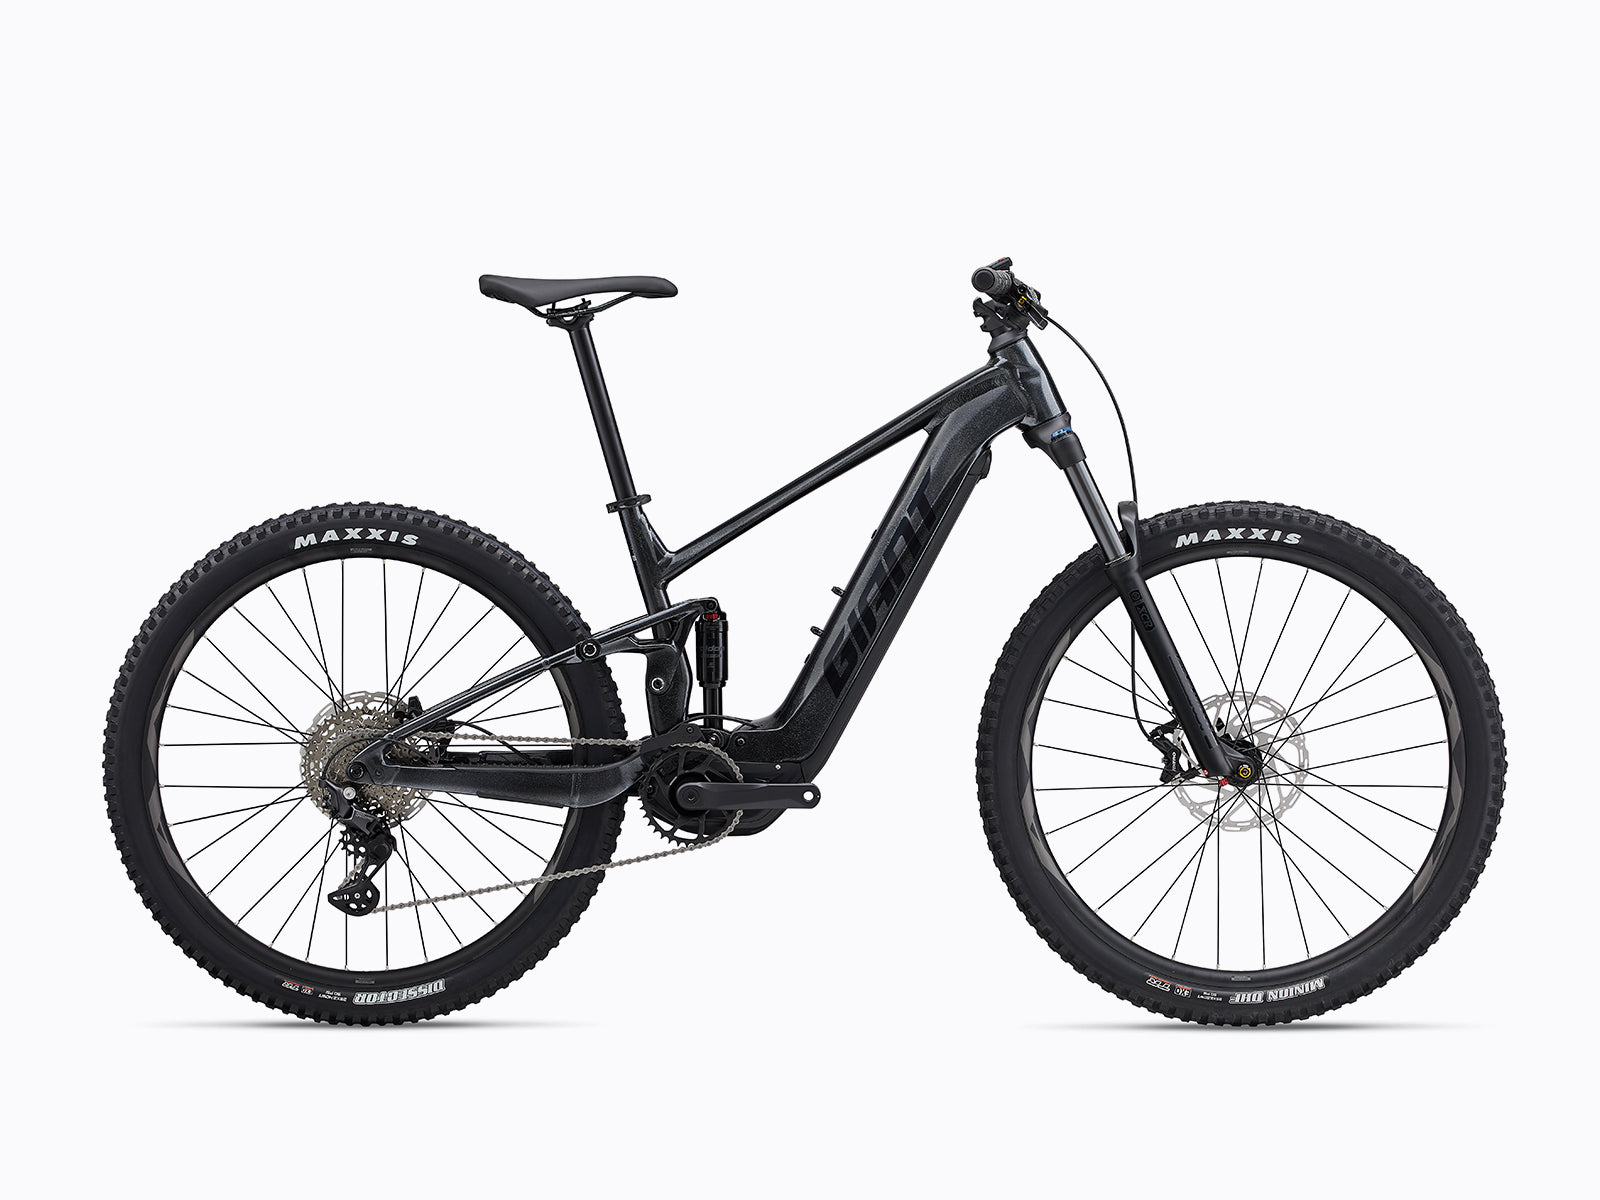 image features a Giant Stance E+ 2, a mountain bike that is sold by Giant Melbourne, Melbourne based bike shop with experienced mechanics.